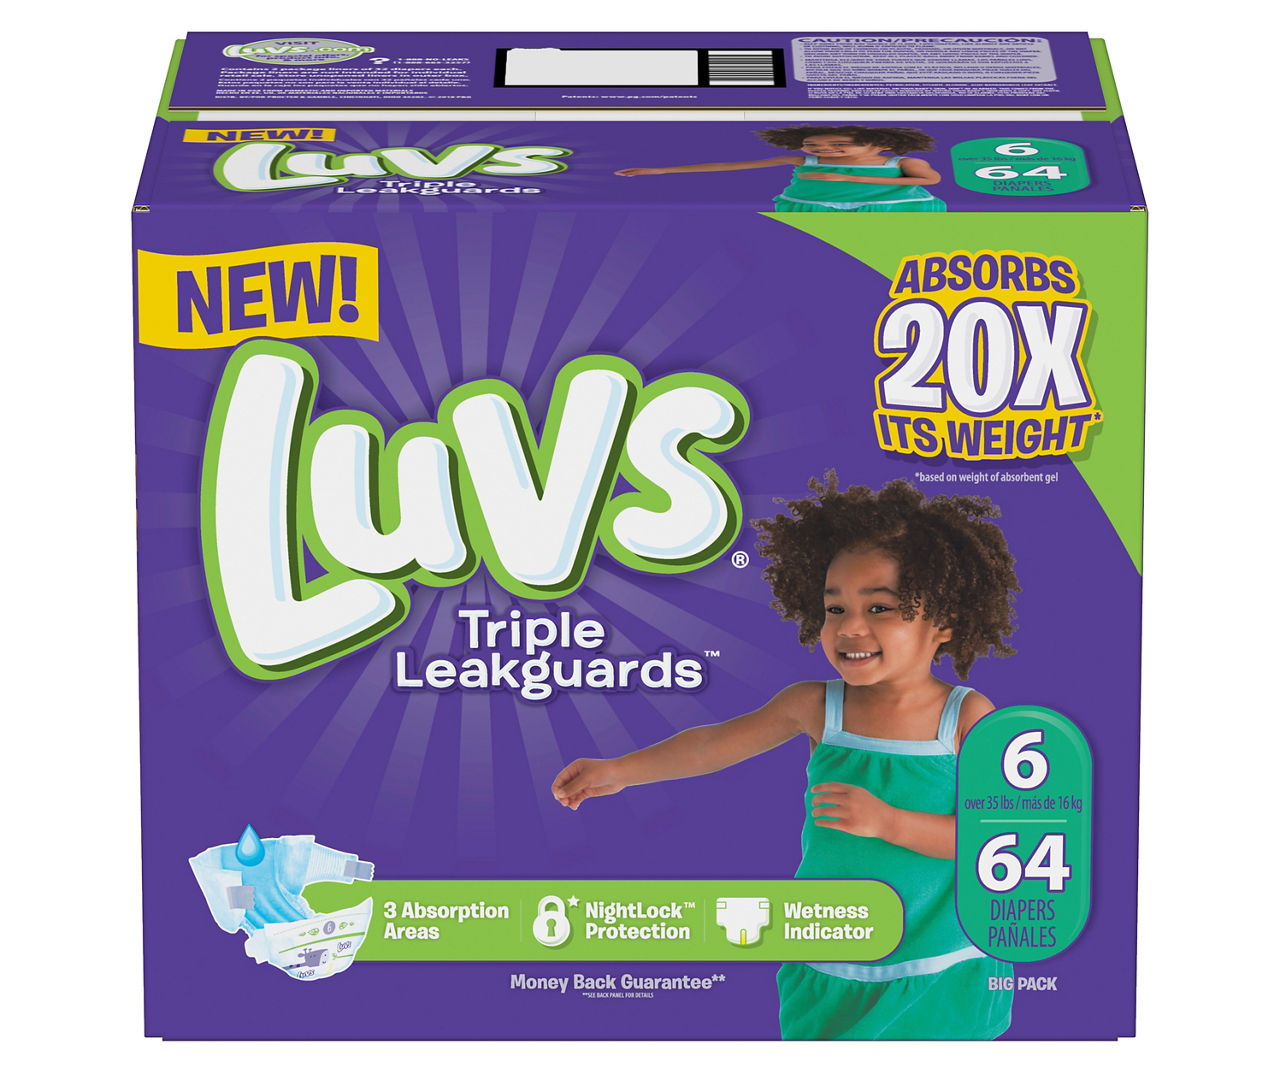 Luvs Diapers Size 7, 64 count - Disposable Diapers